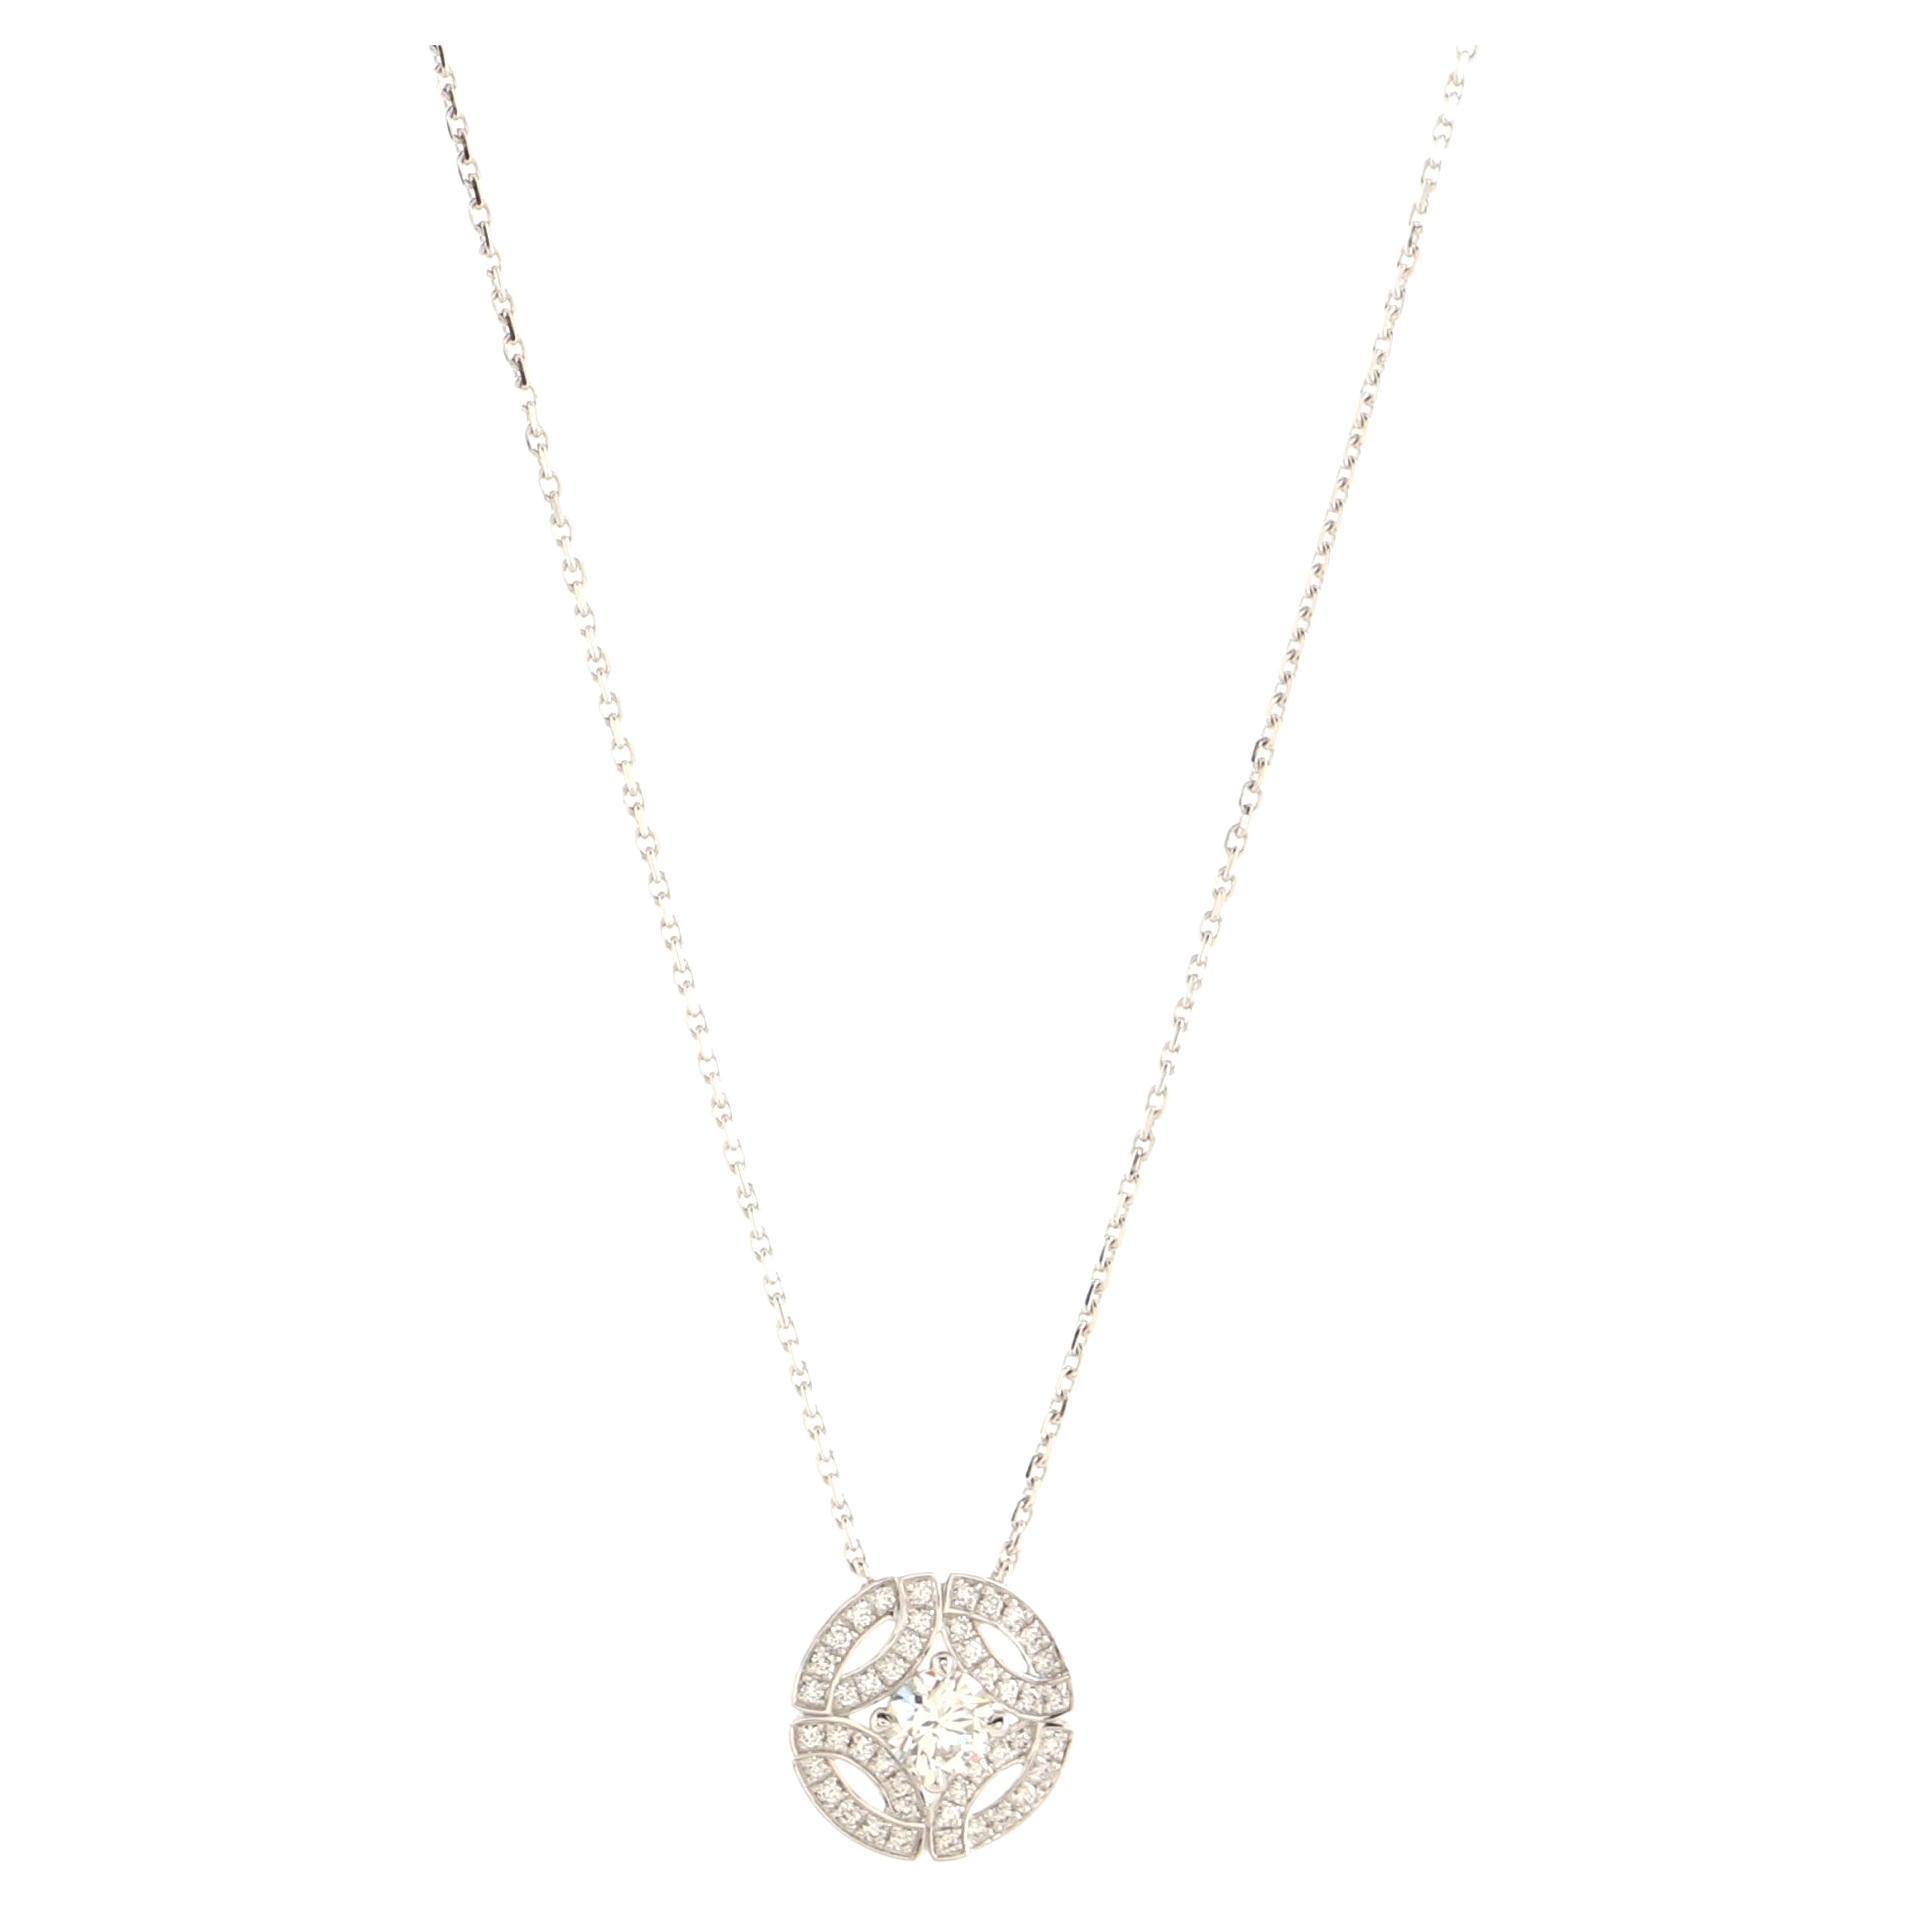 Cartier Galanterie Pendant Necklace 18k White Gold and Diamonds with RBC